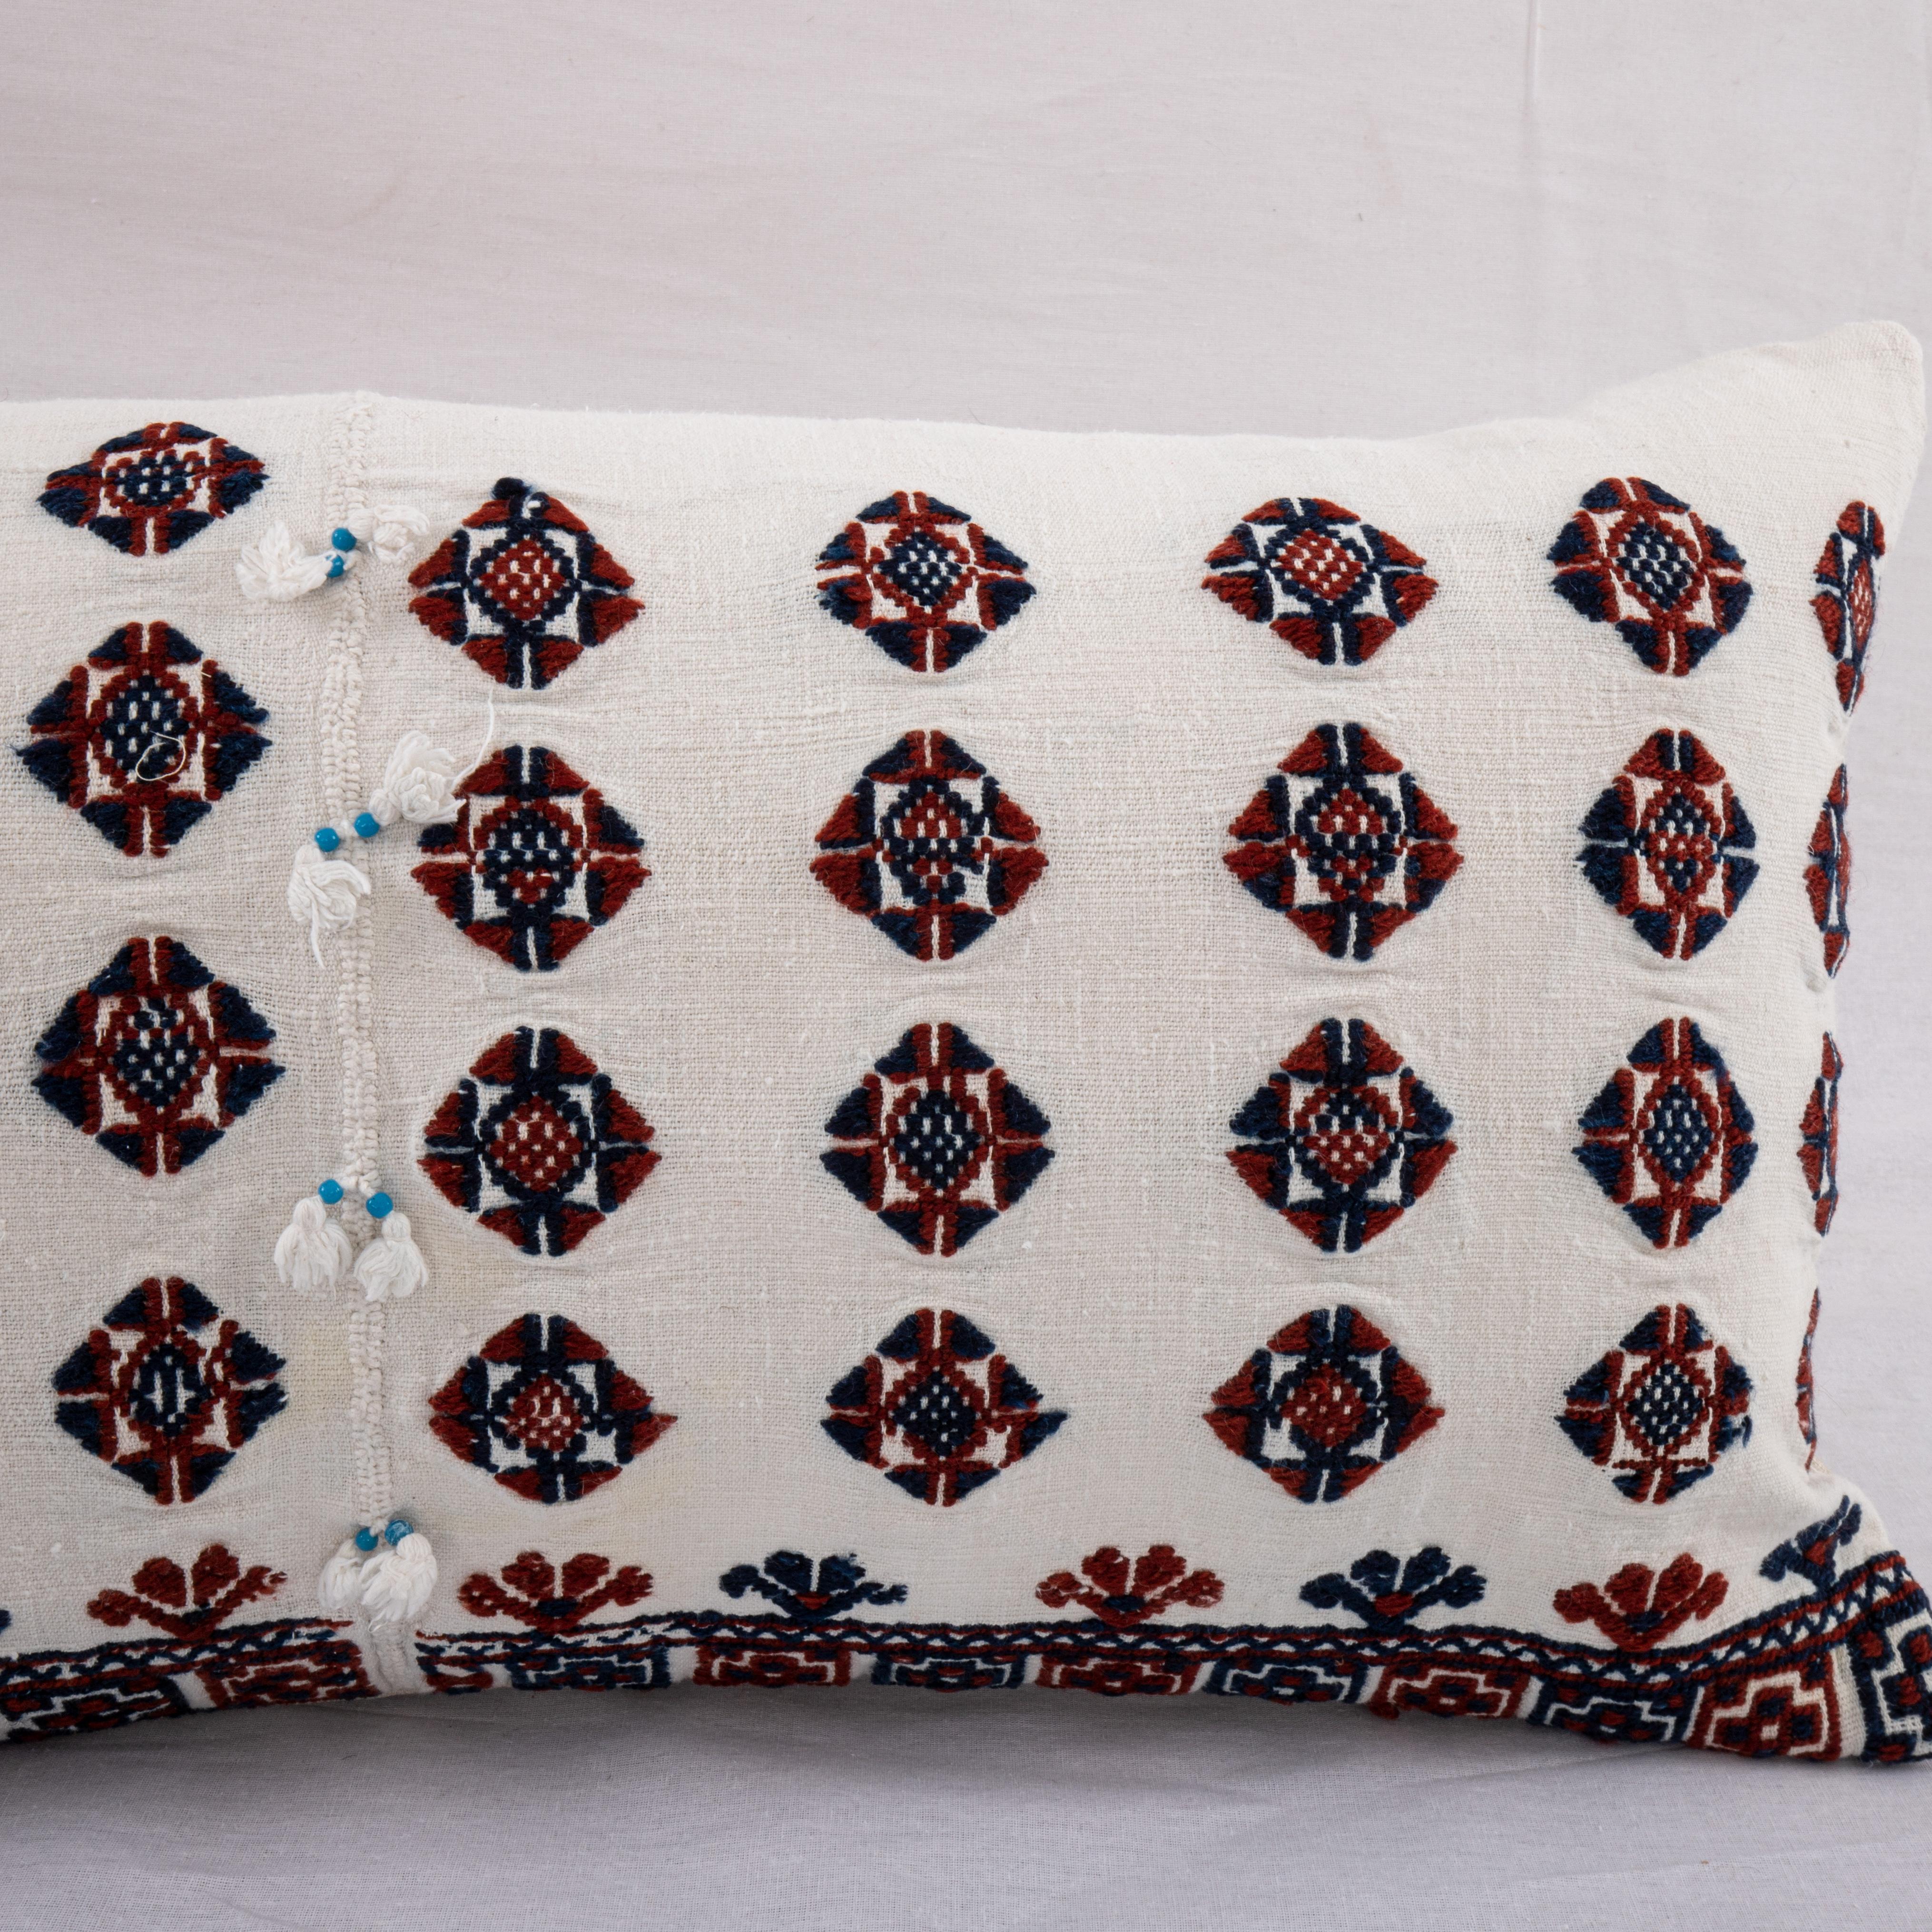 Pillow Cover Made from an Anatolian Embroidered Skirt, 2nd Quarter 20th C. In Good Condition For Sale In Istanbul, TR